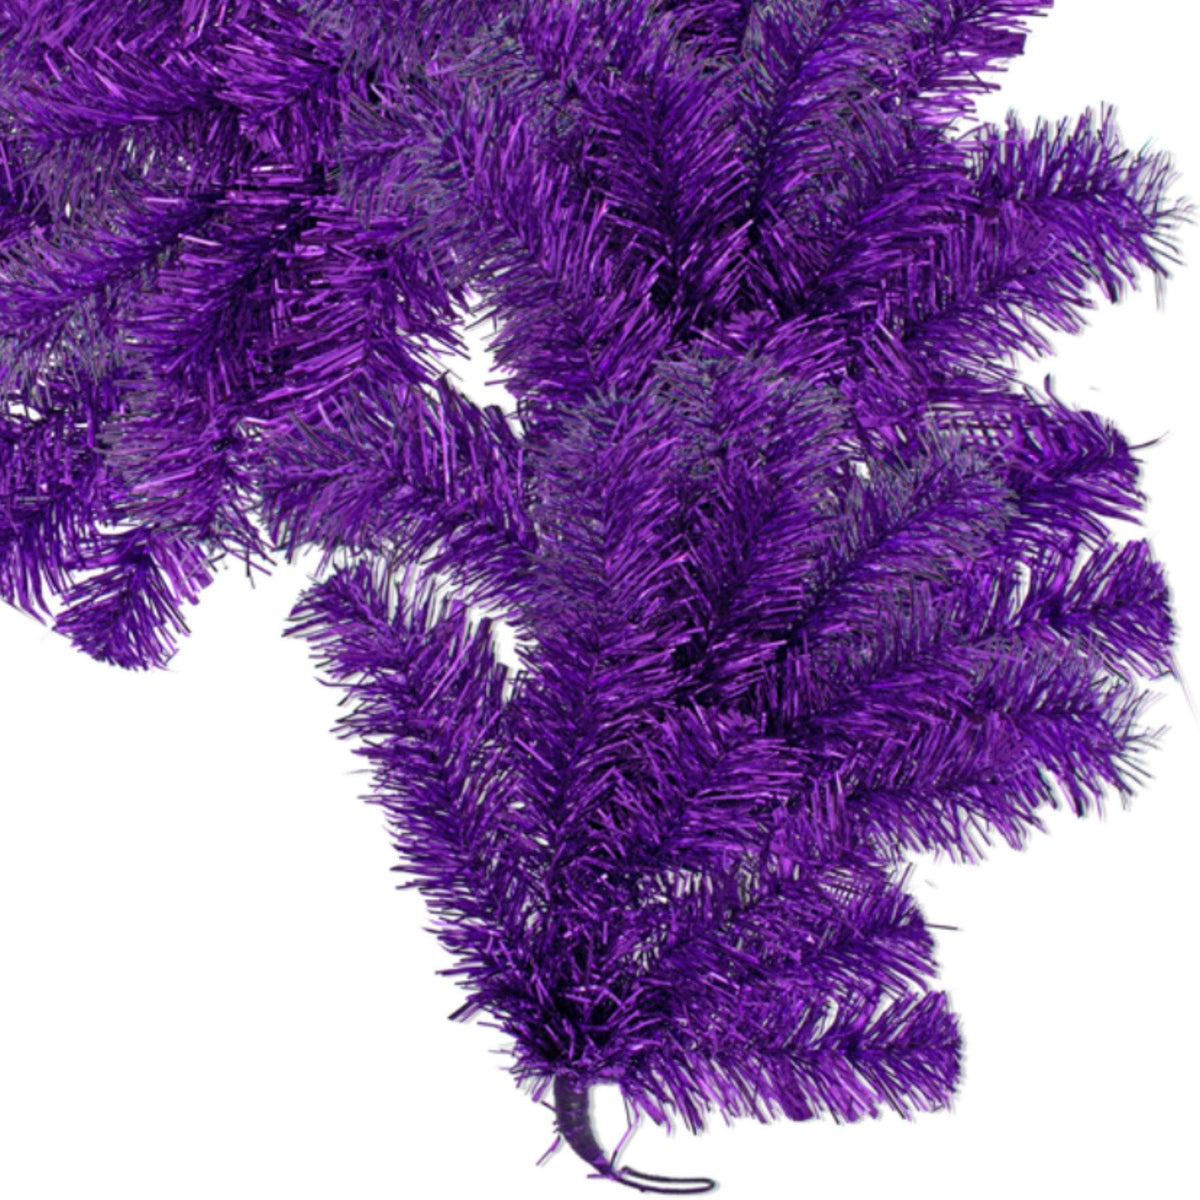 Shop for Lee Display's brand new 6FT Shiny Metallic Purple Tinsel Brush Garlands on sale now at leedisplay.com.  Made on a bendable wire